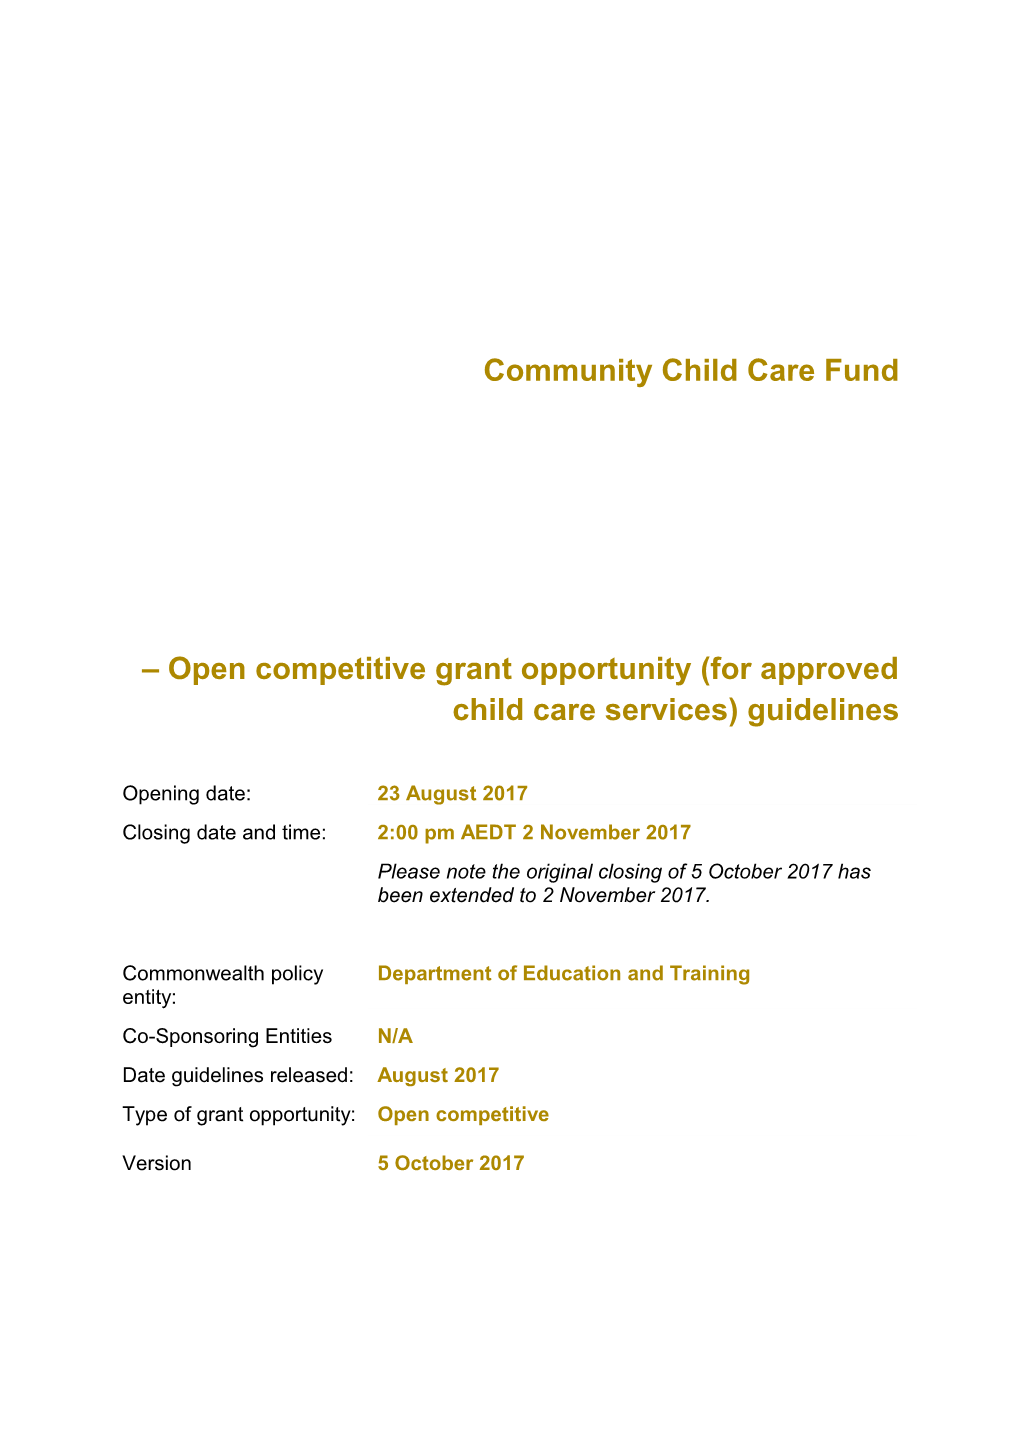 1.Community Child Care Fund: Open Competitive Grant Opportunity Process